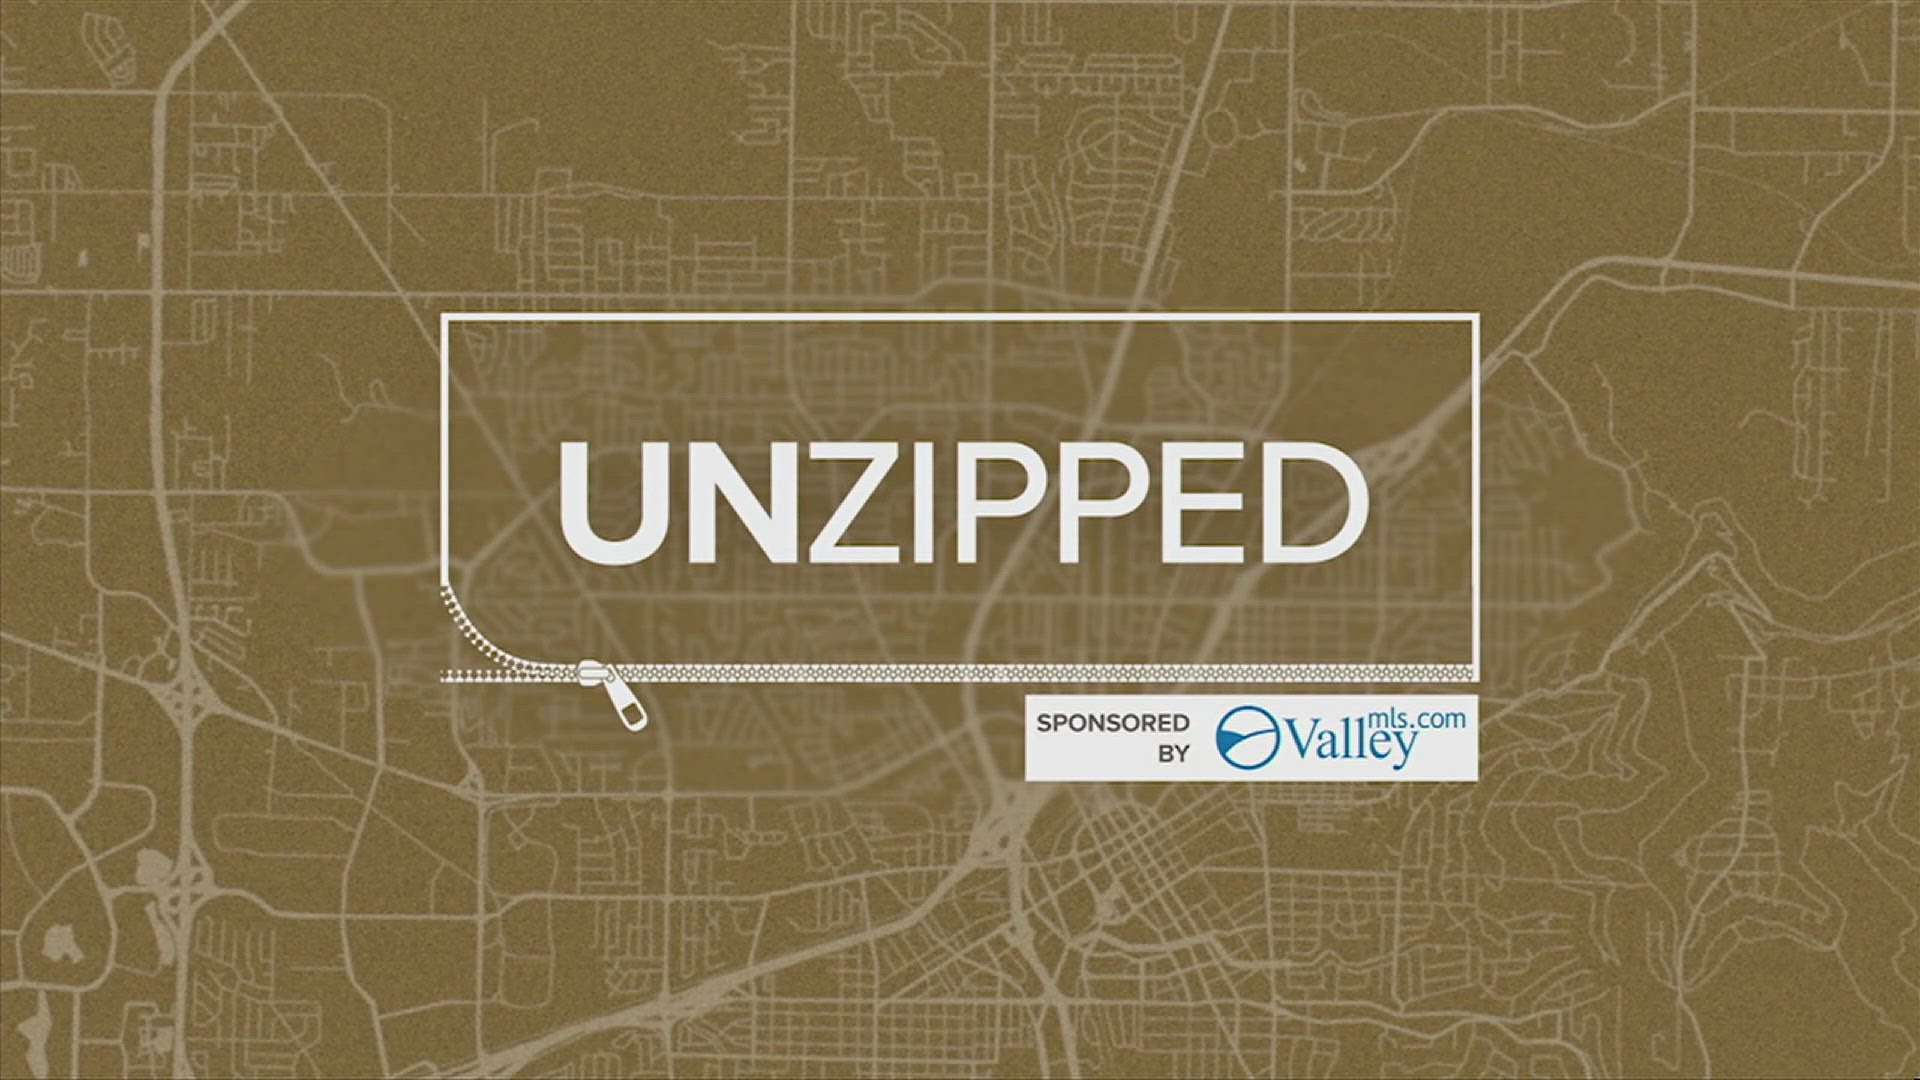 Ken McCoy revisits some of the locations he's visited in our reboot of the "Unzipped" series.